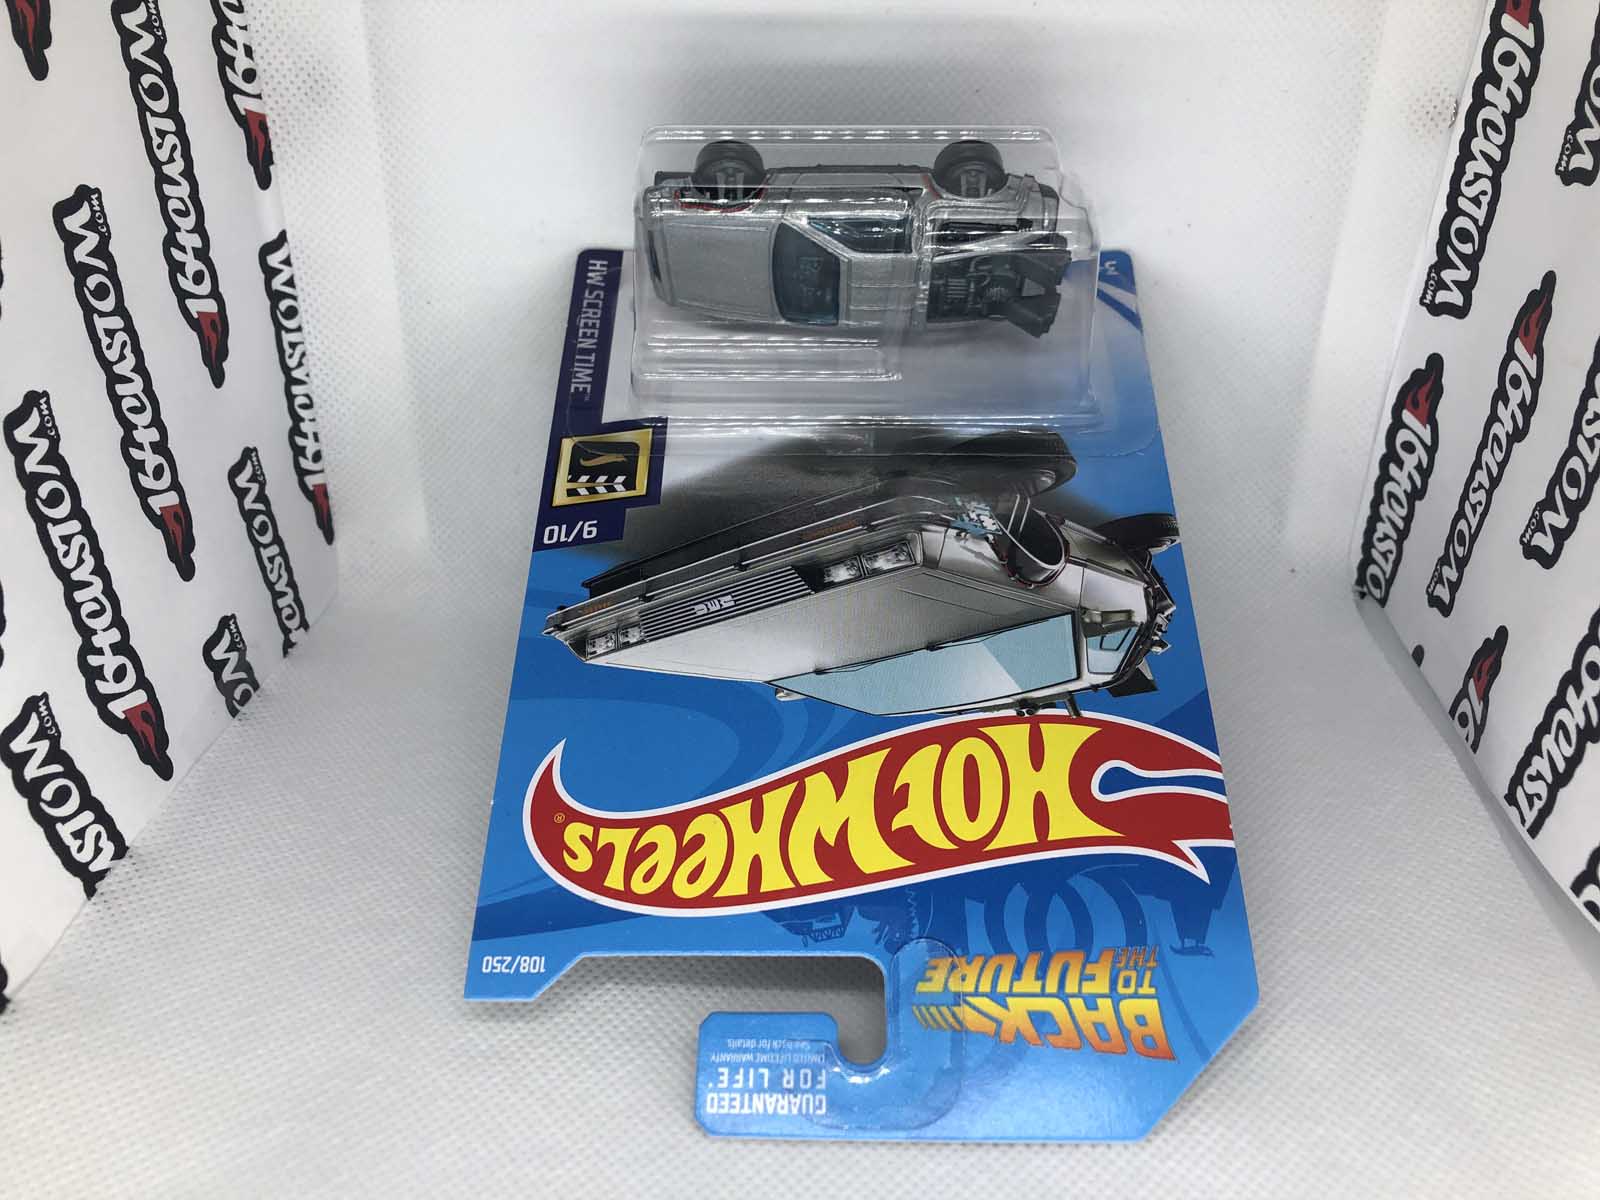 Back to the Future Time Machine - Hover Mode Hot Wheels